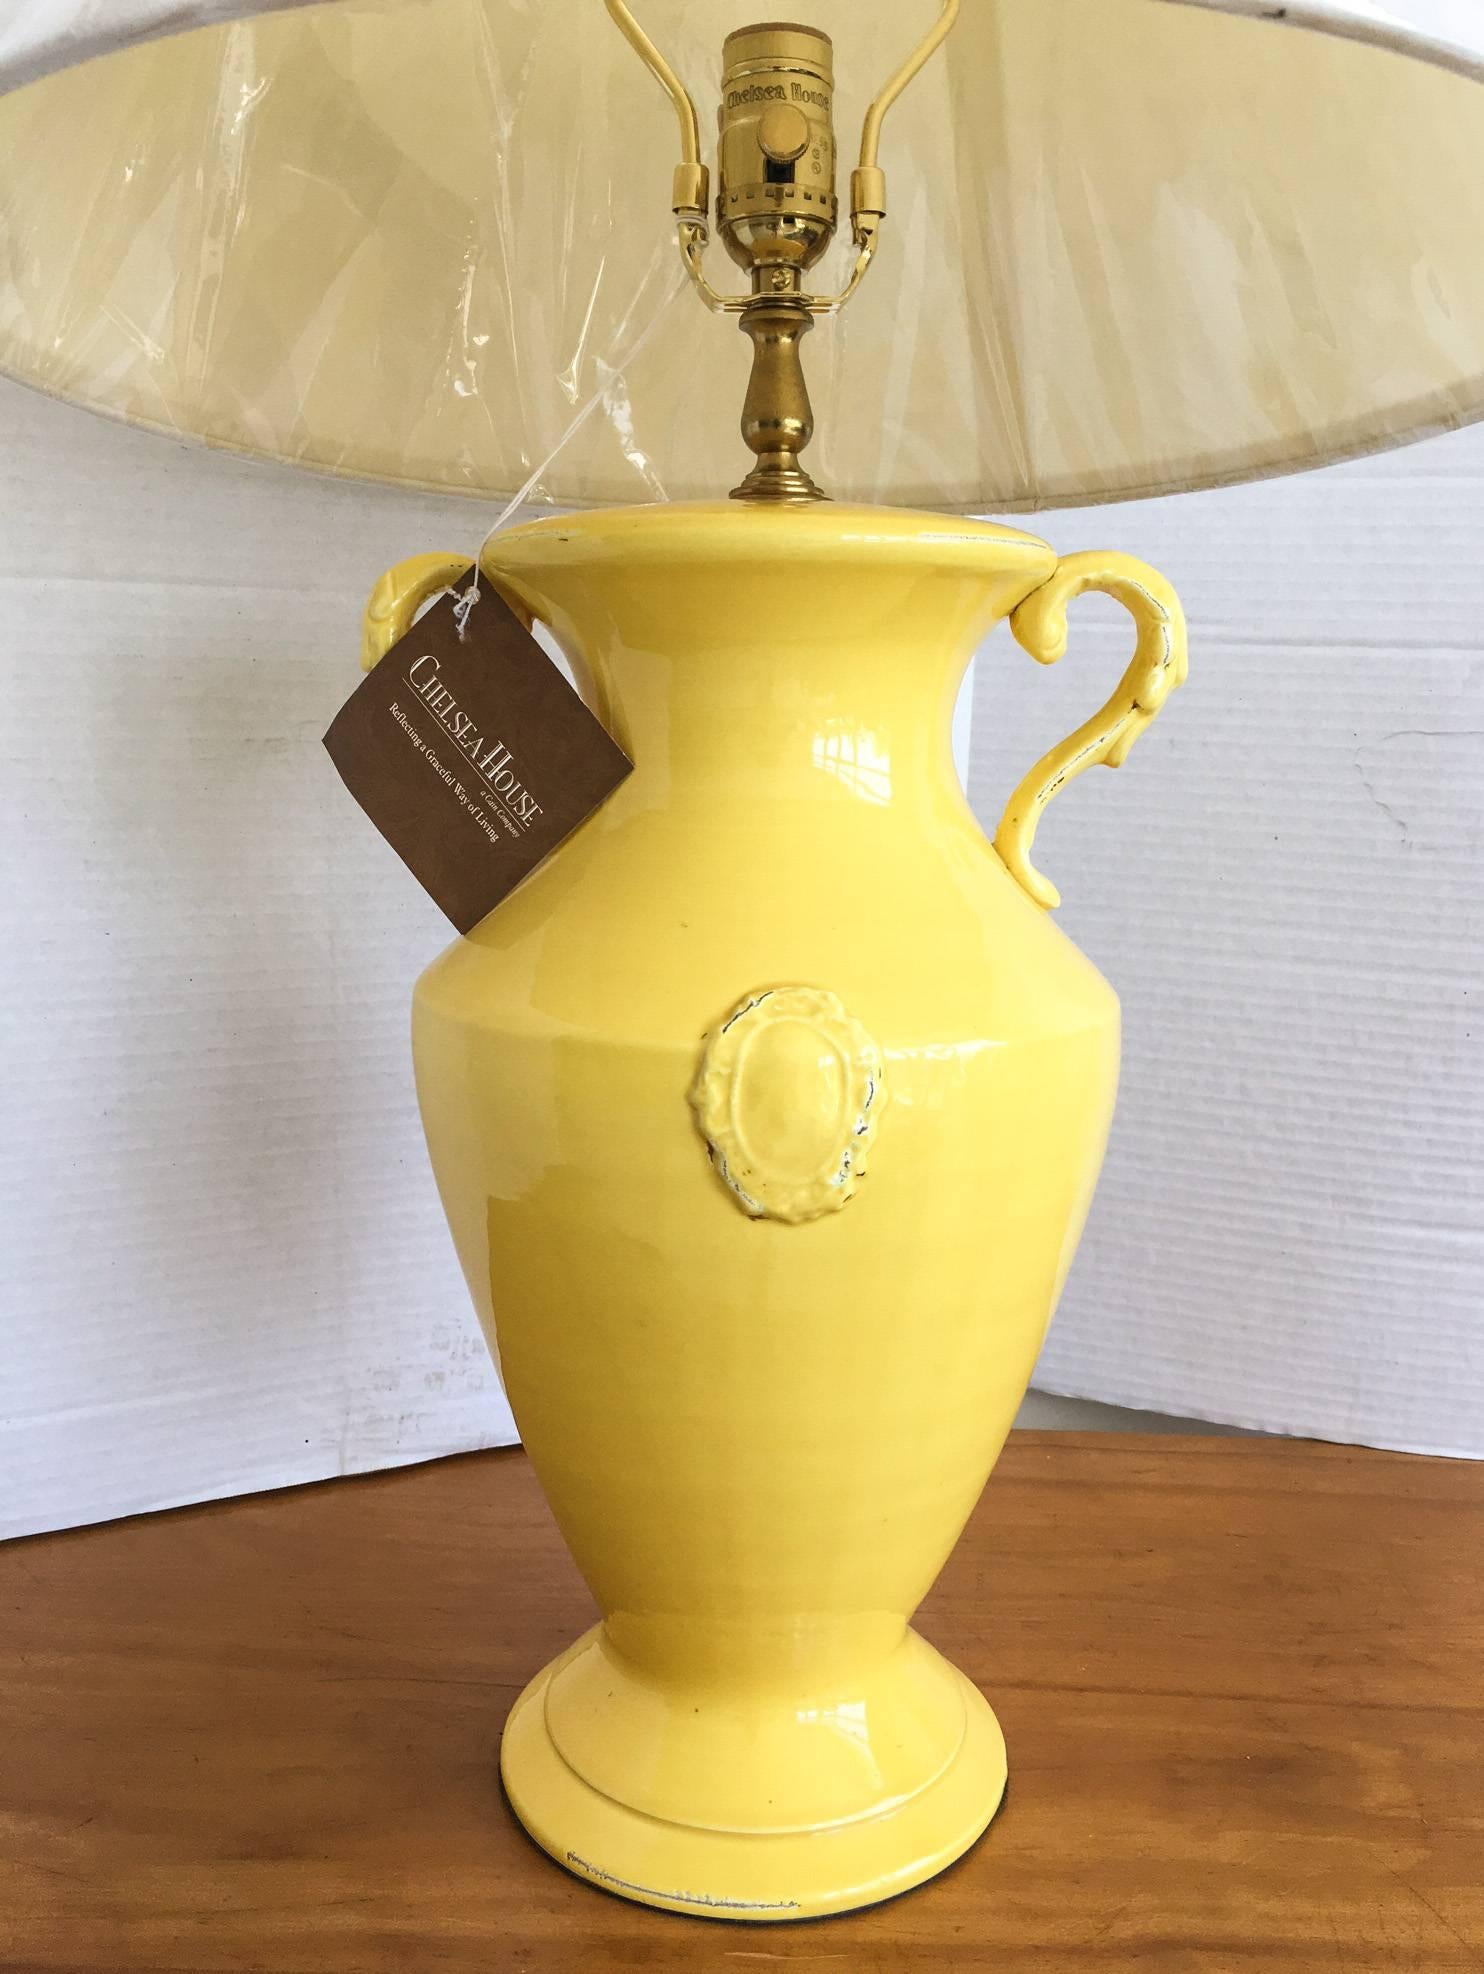 Fantastic ceramic base table lamp by Chelsea House with two side handles and a cartouche decoration on the front and back. Lamp has some intentional distressing along the edges and comes with a new in plastic shade as shown. Never used. The lamp and